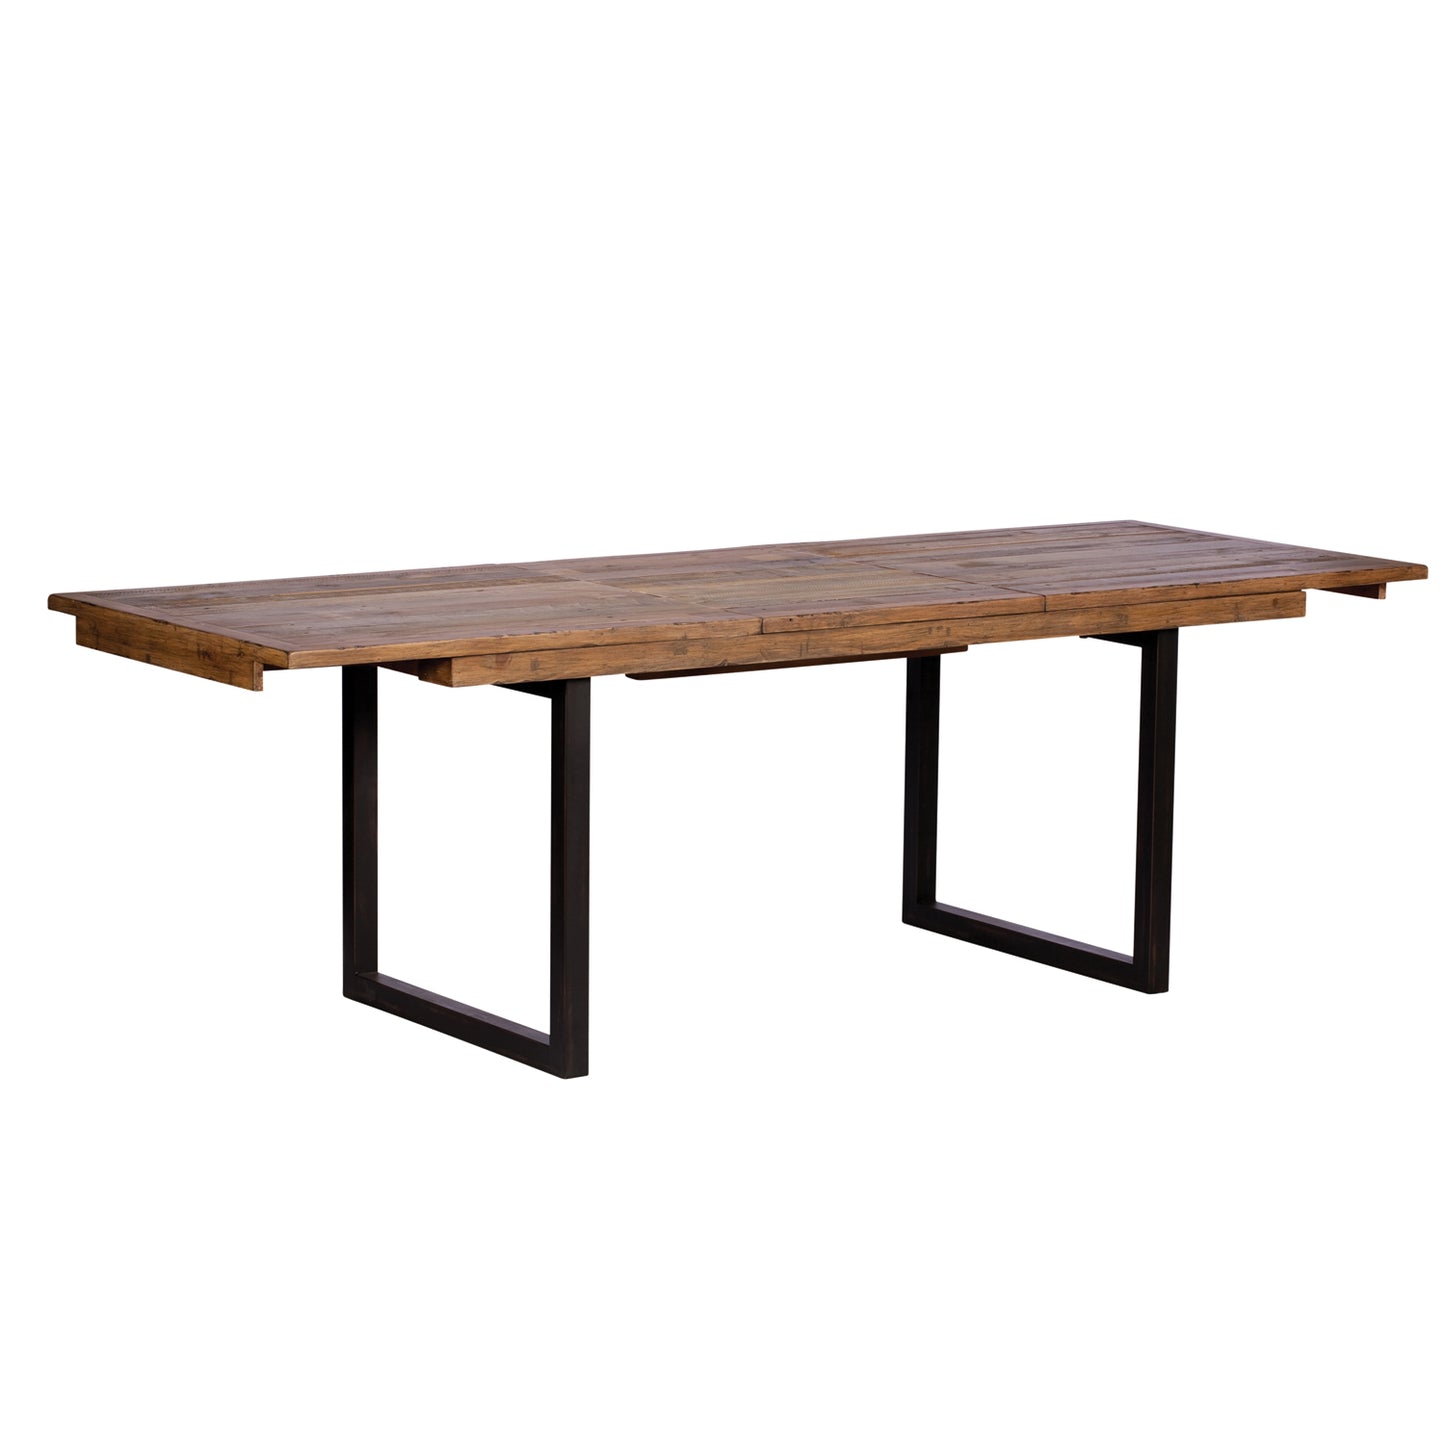 Colebrook Dining Table - 180-240cm Extending